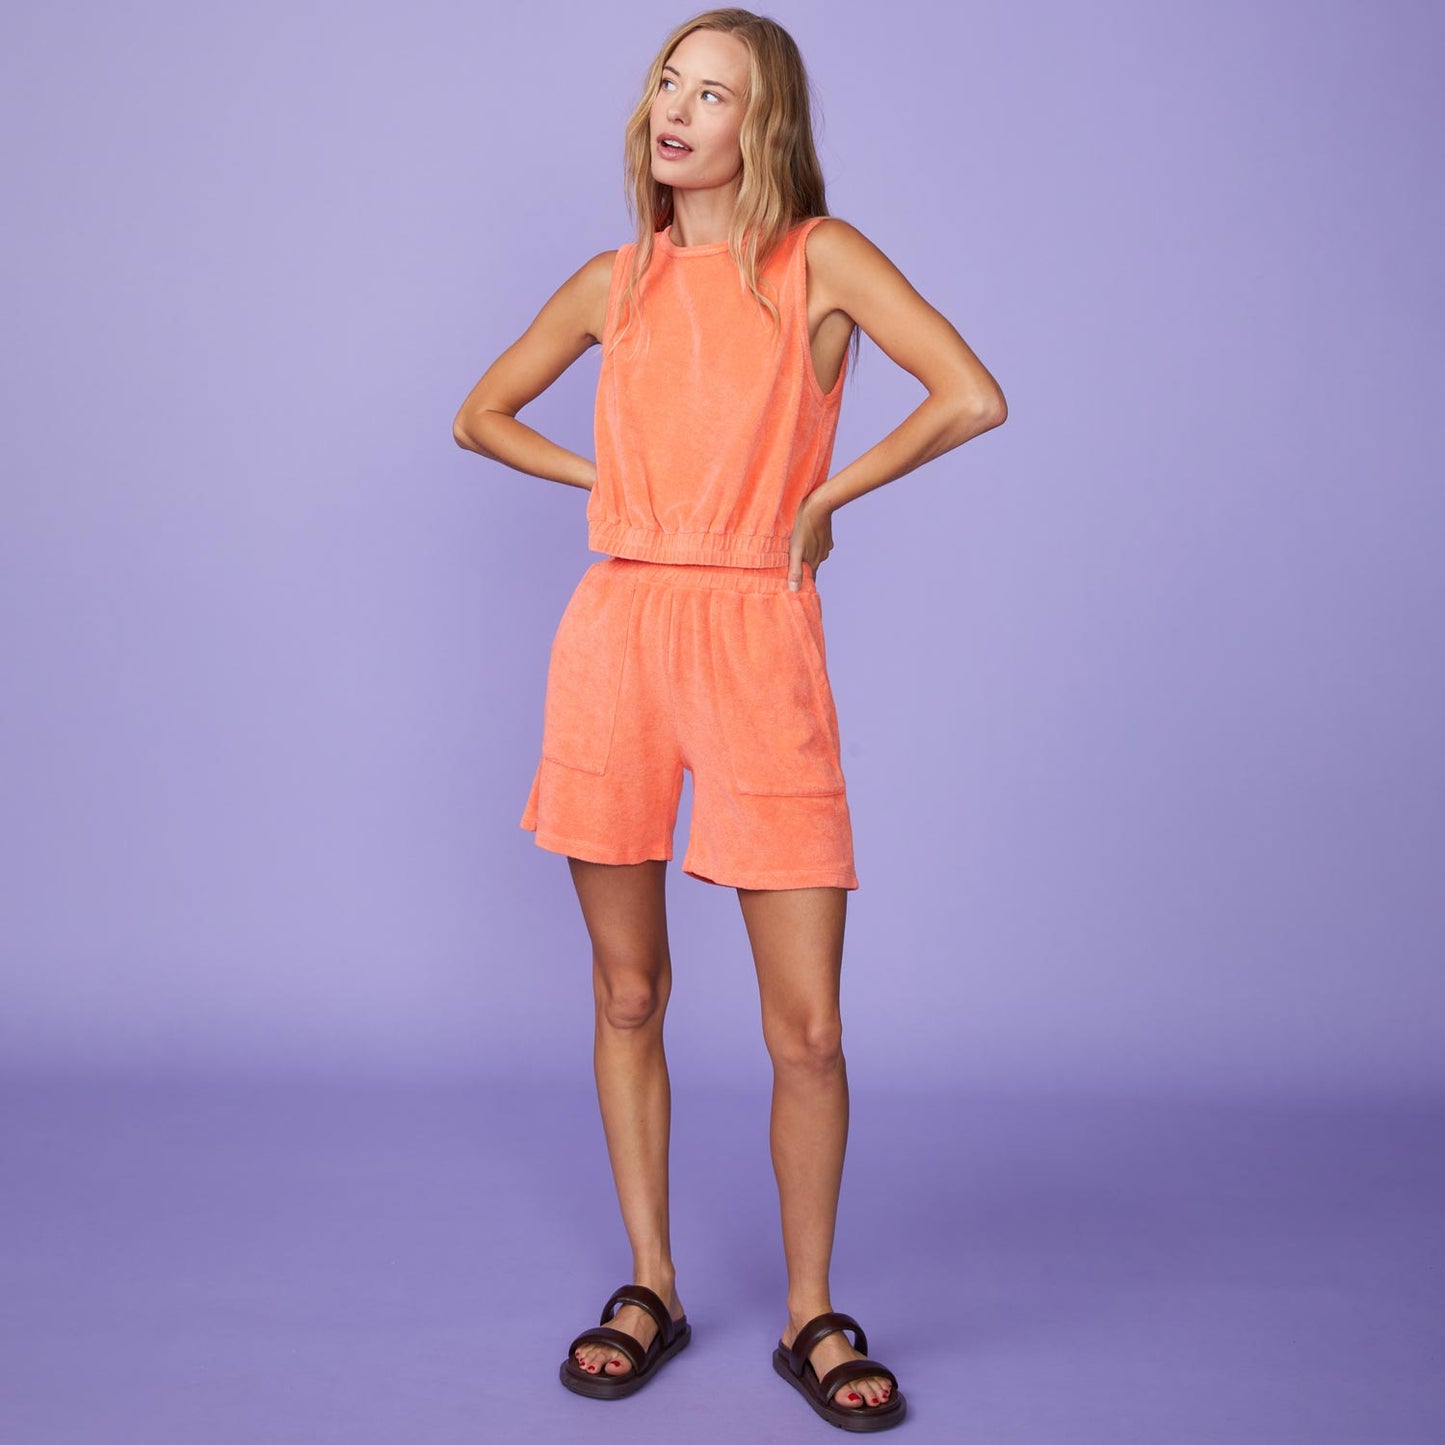 Full View of model wearing the Terry Cloth Tank in Georgia Peach.